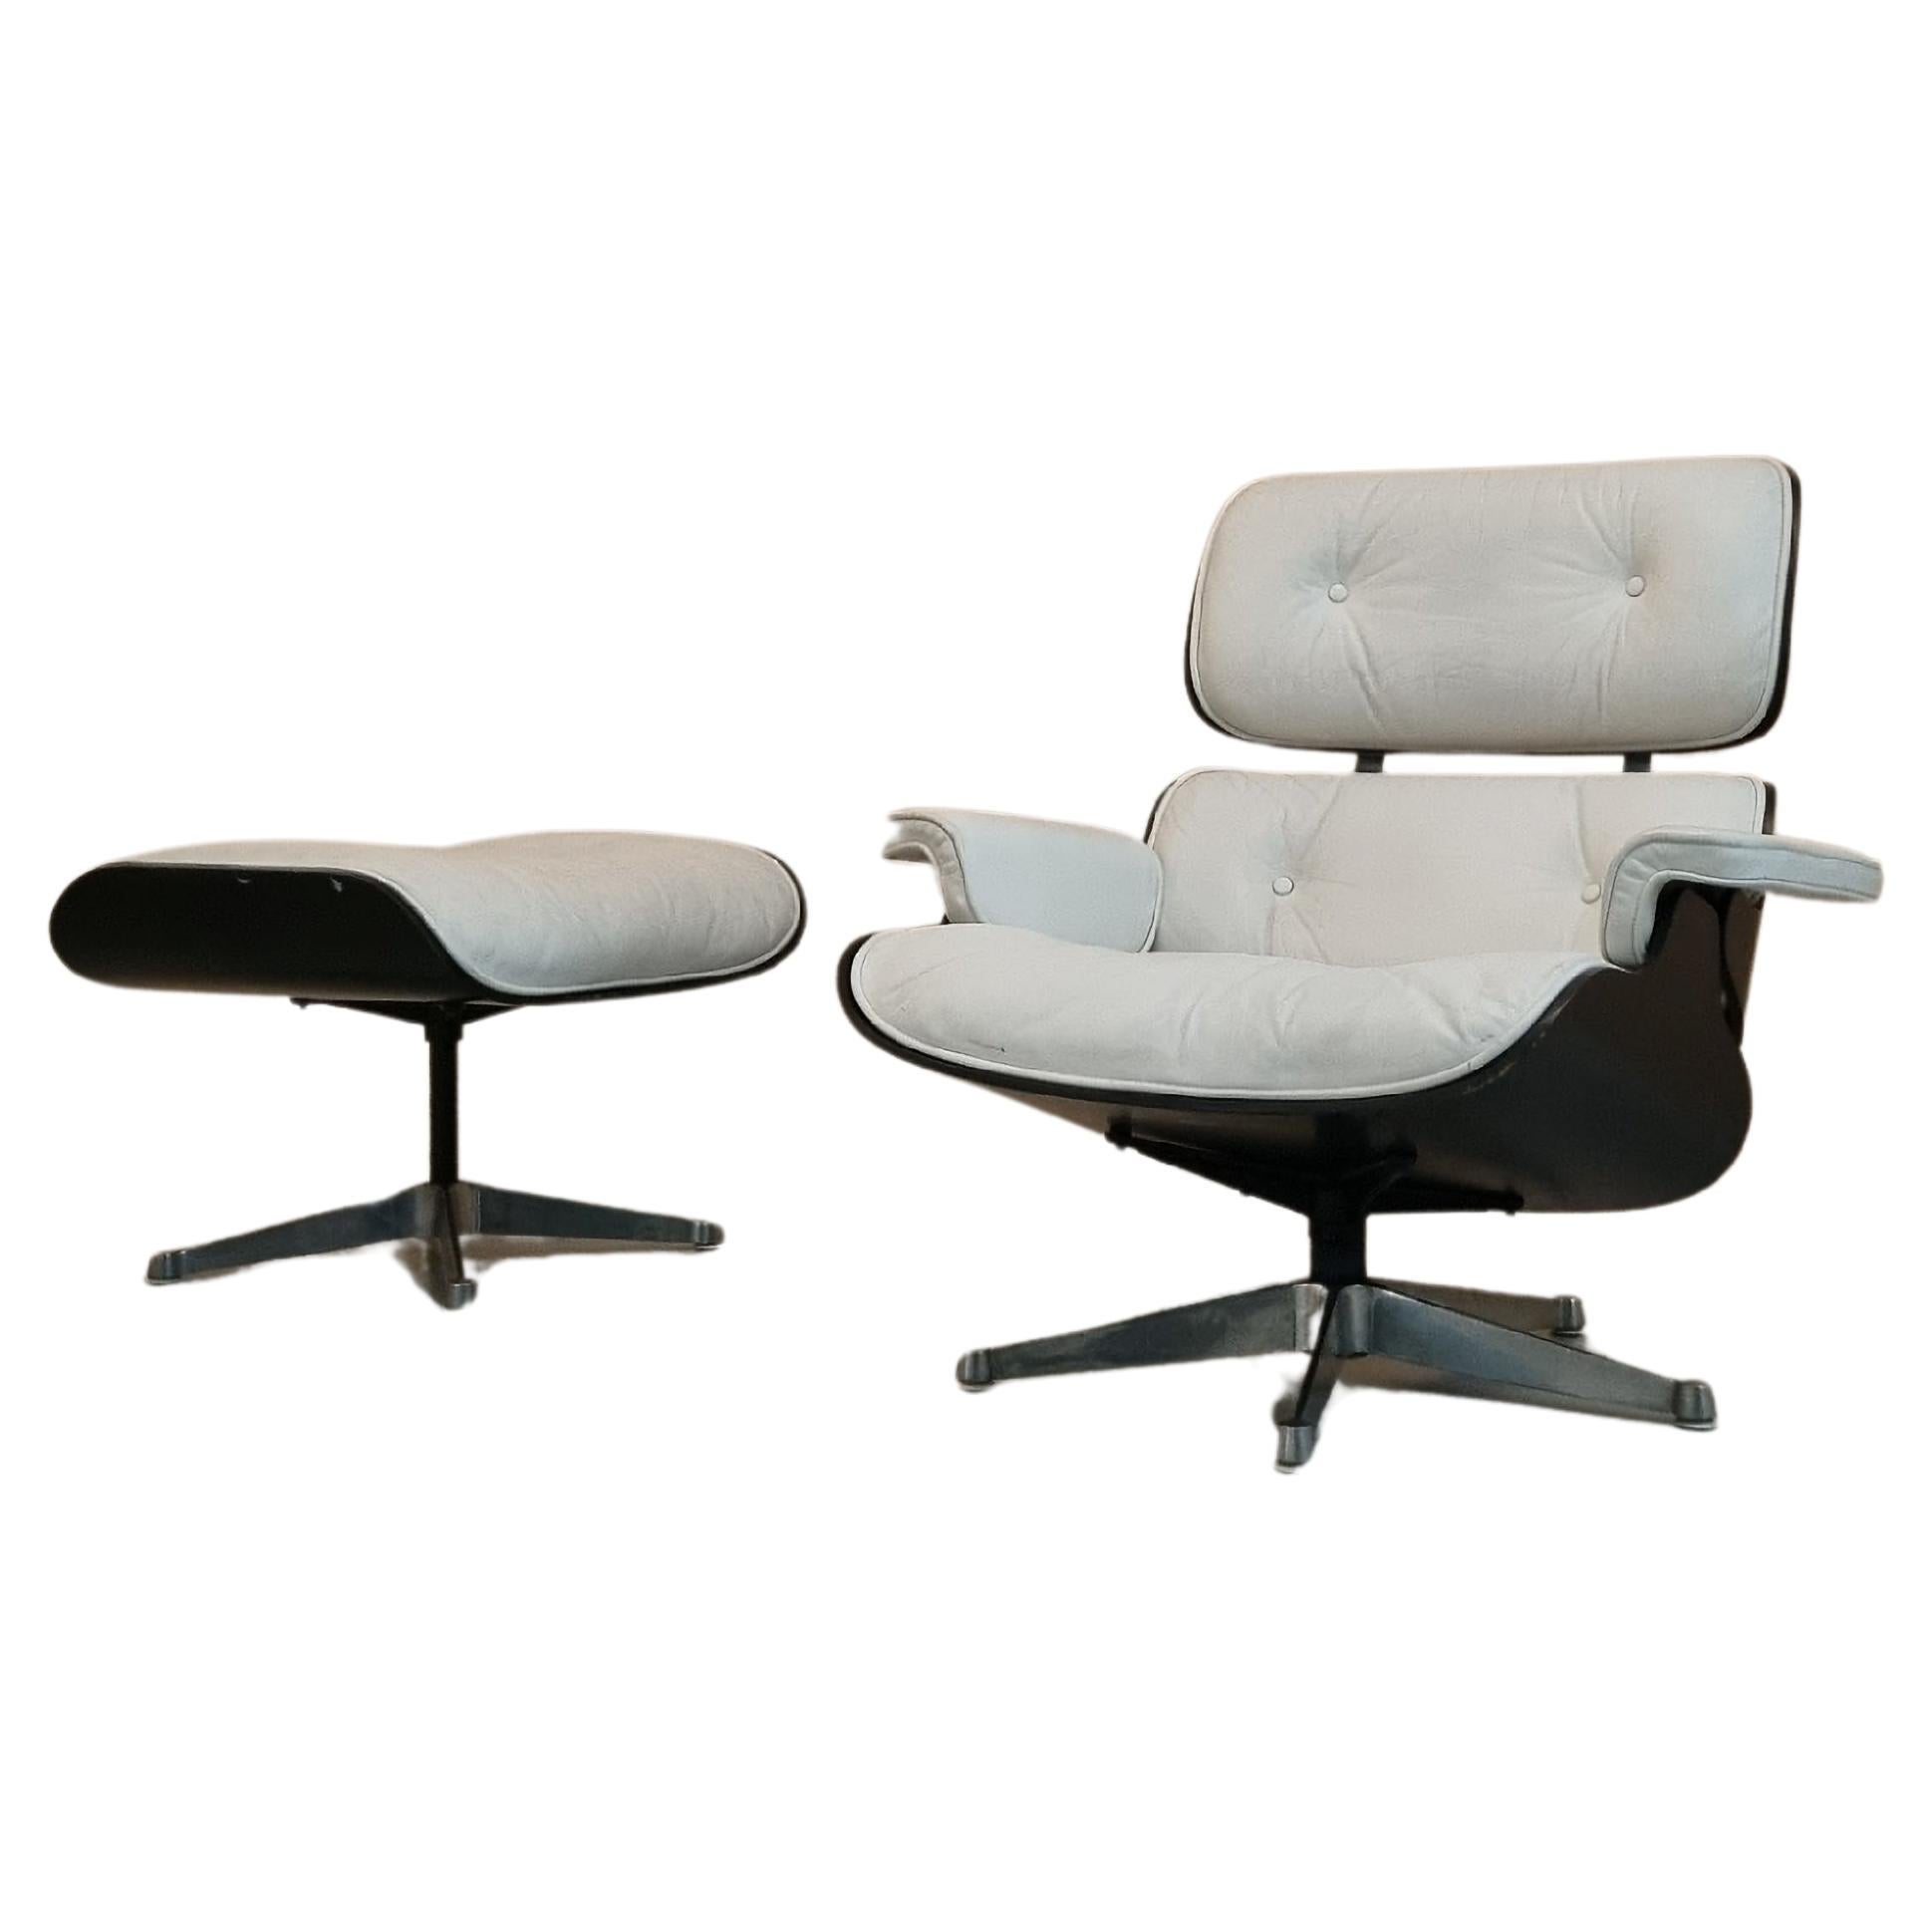 Eames 670 Lounge chair and 671 ottoman designed by Charles and Ray Eames for ICF For Sale